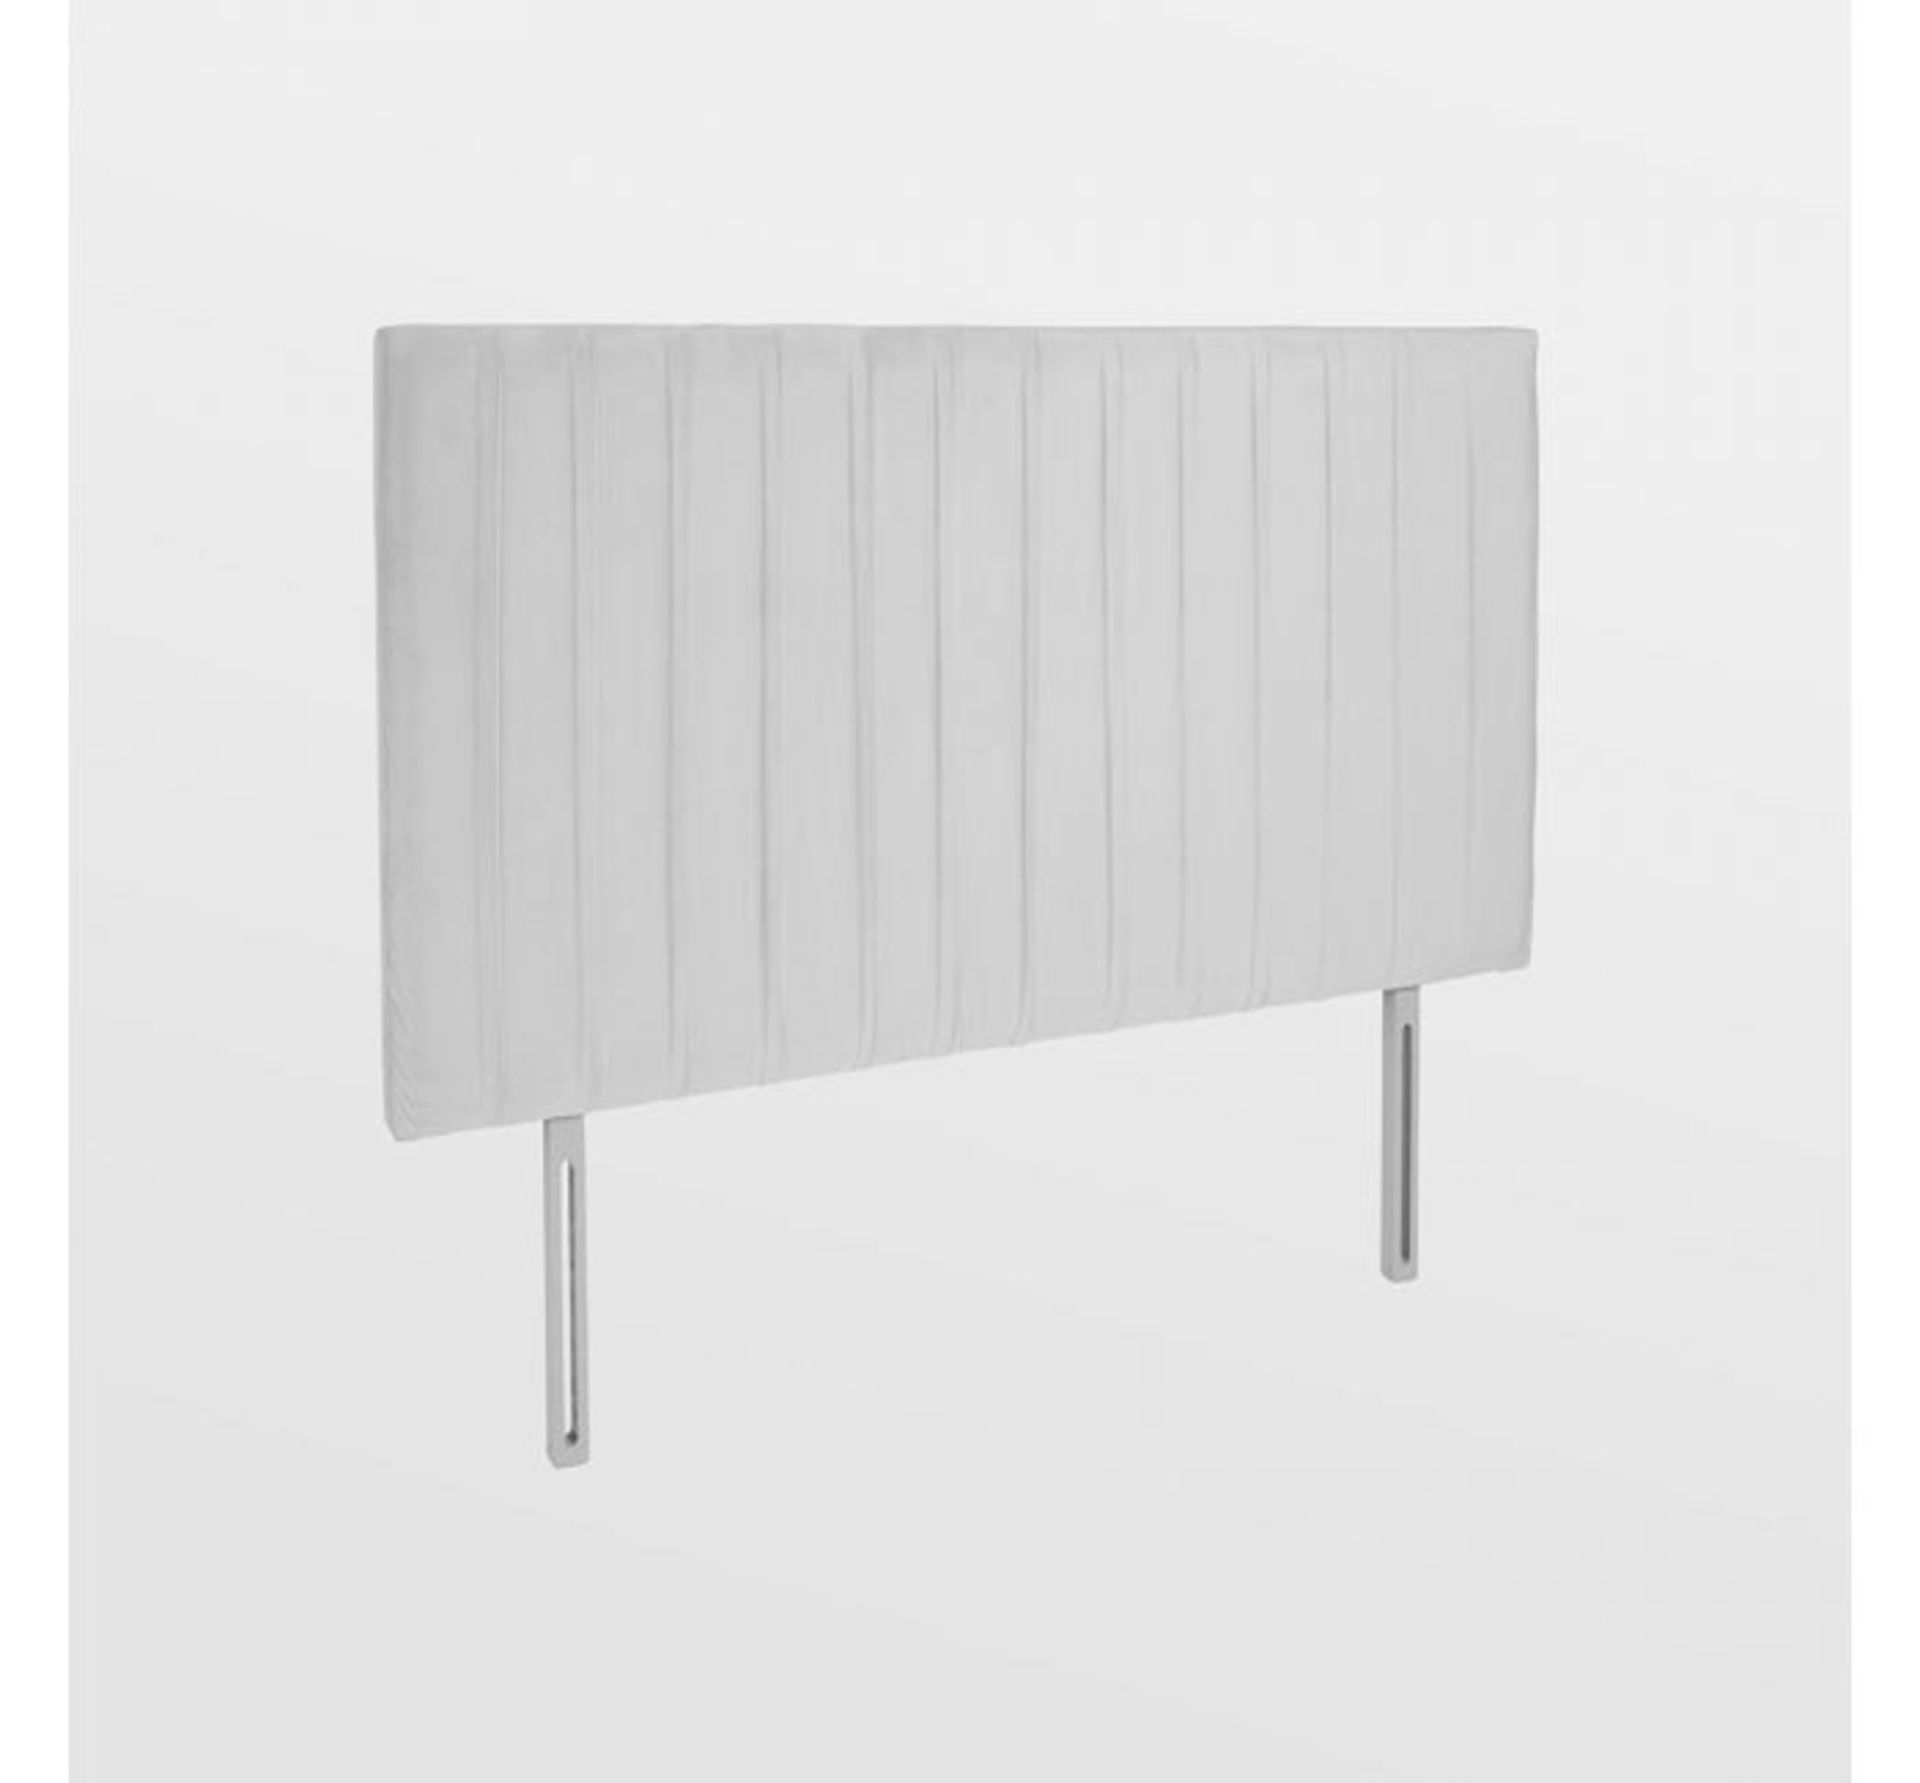 (MY68) Grey Velvet Double Headboard In a modern grey velvet with ruched detailing, it adds a to...